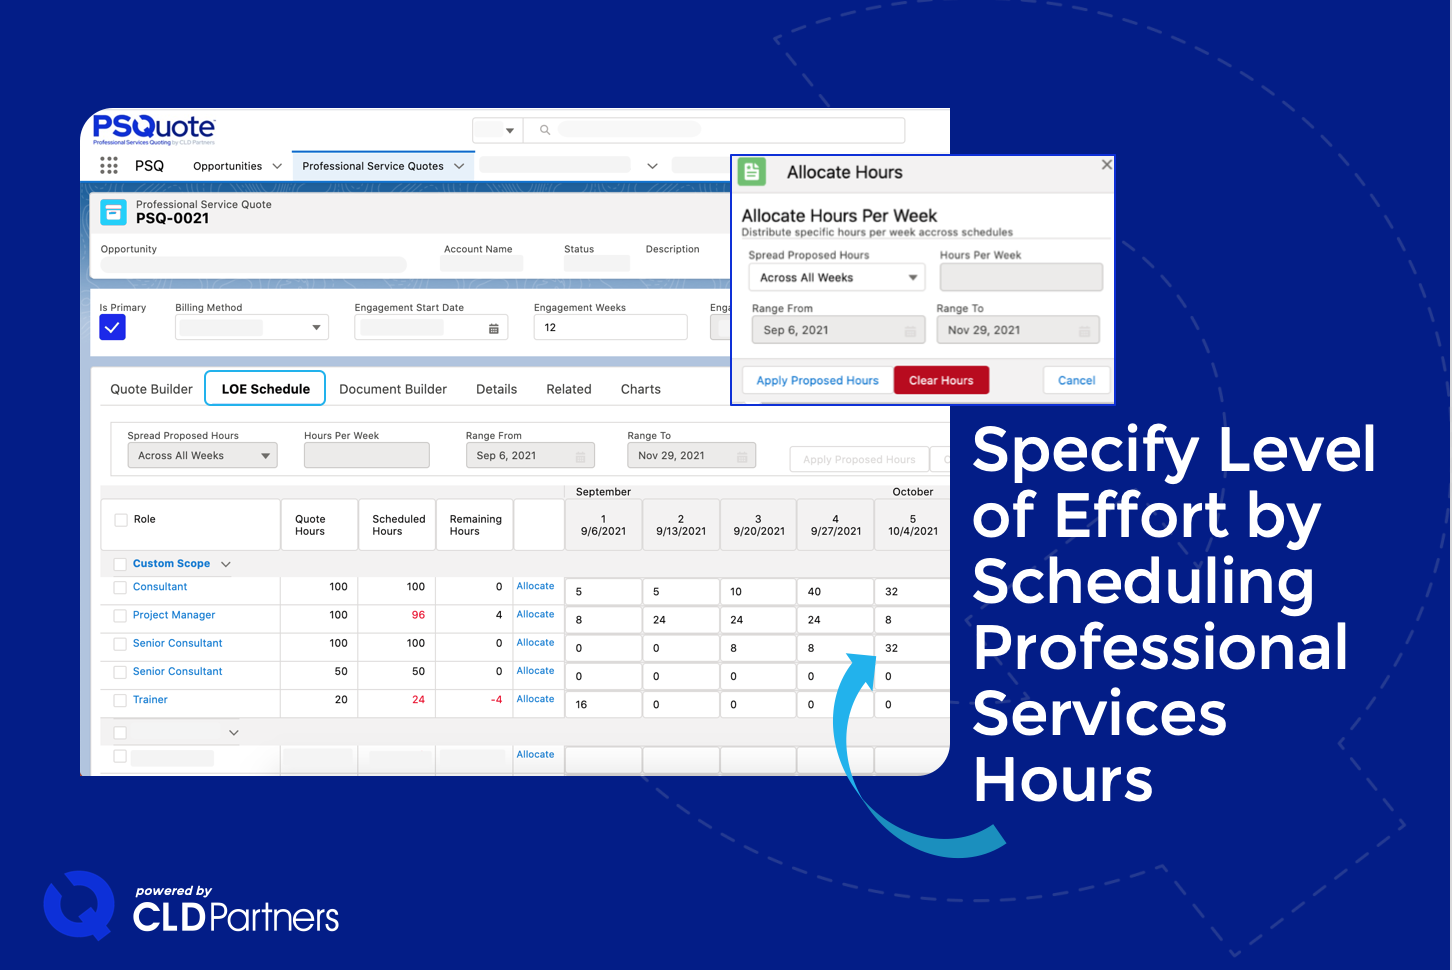 Schedule resources to improve forecasting and resource demand planning